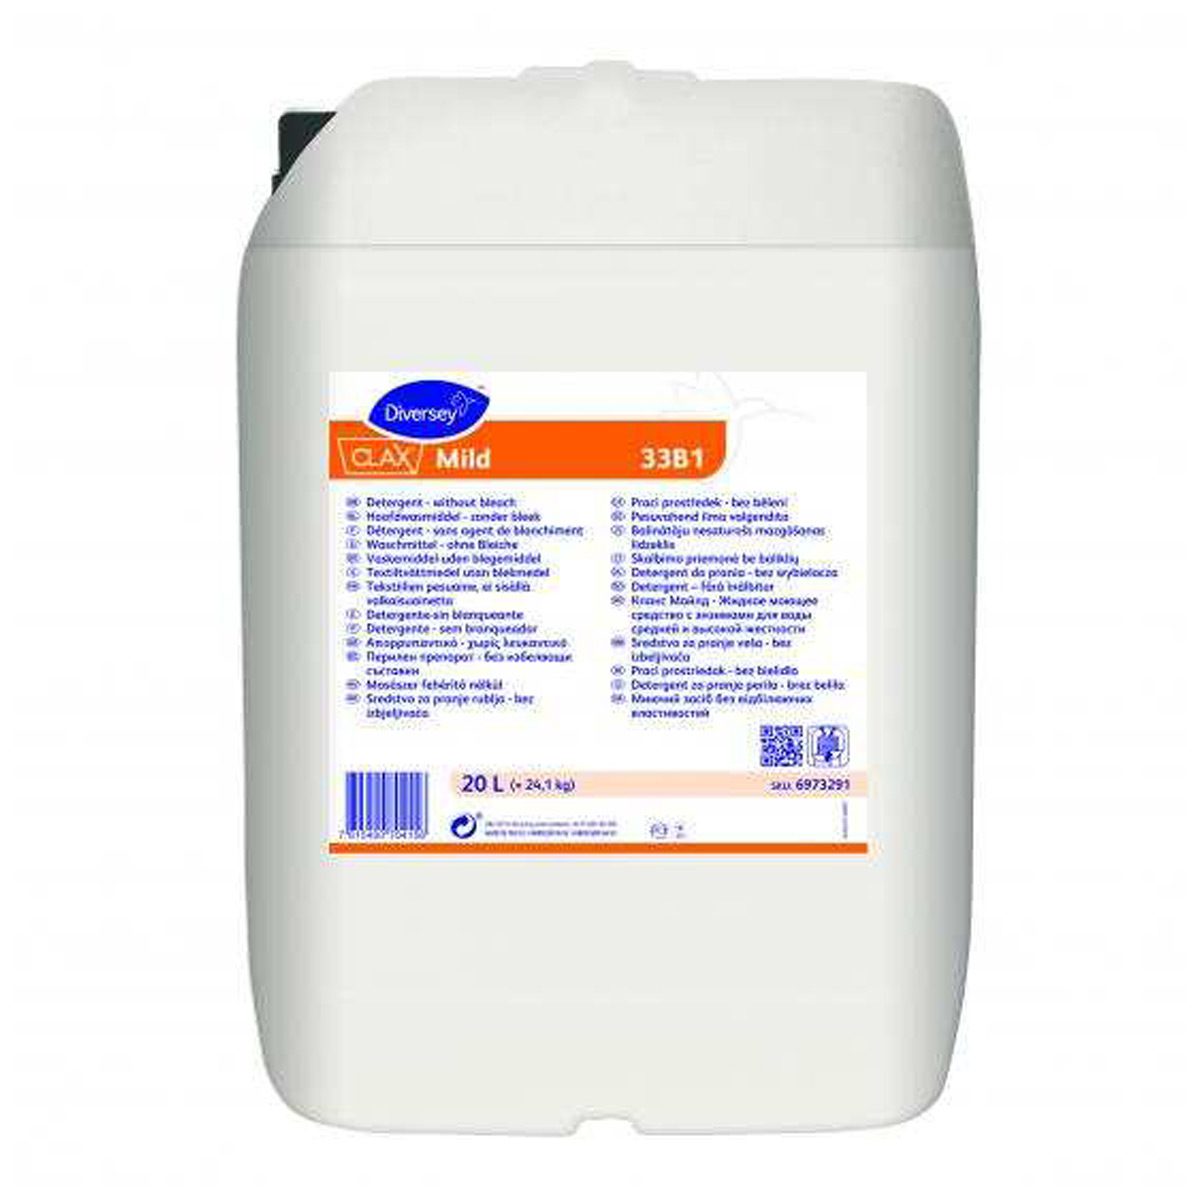 cleaning-products-laundry-diversey-clax-mild-laundry-33b1-20L-litre-effective-enzymated-detergent-able-to-be-used-in-automatic-and-manual-dosing-applications-vjs-distributors-4990494